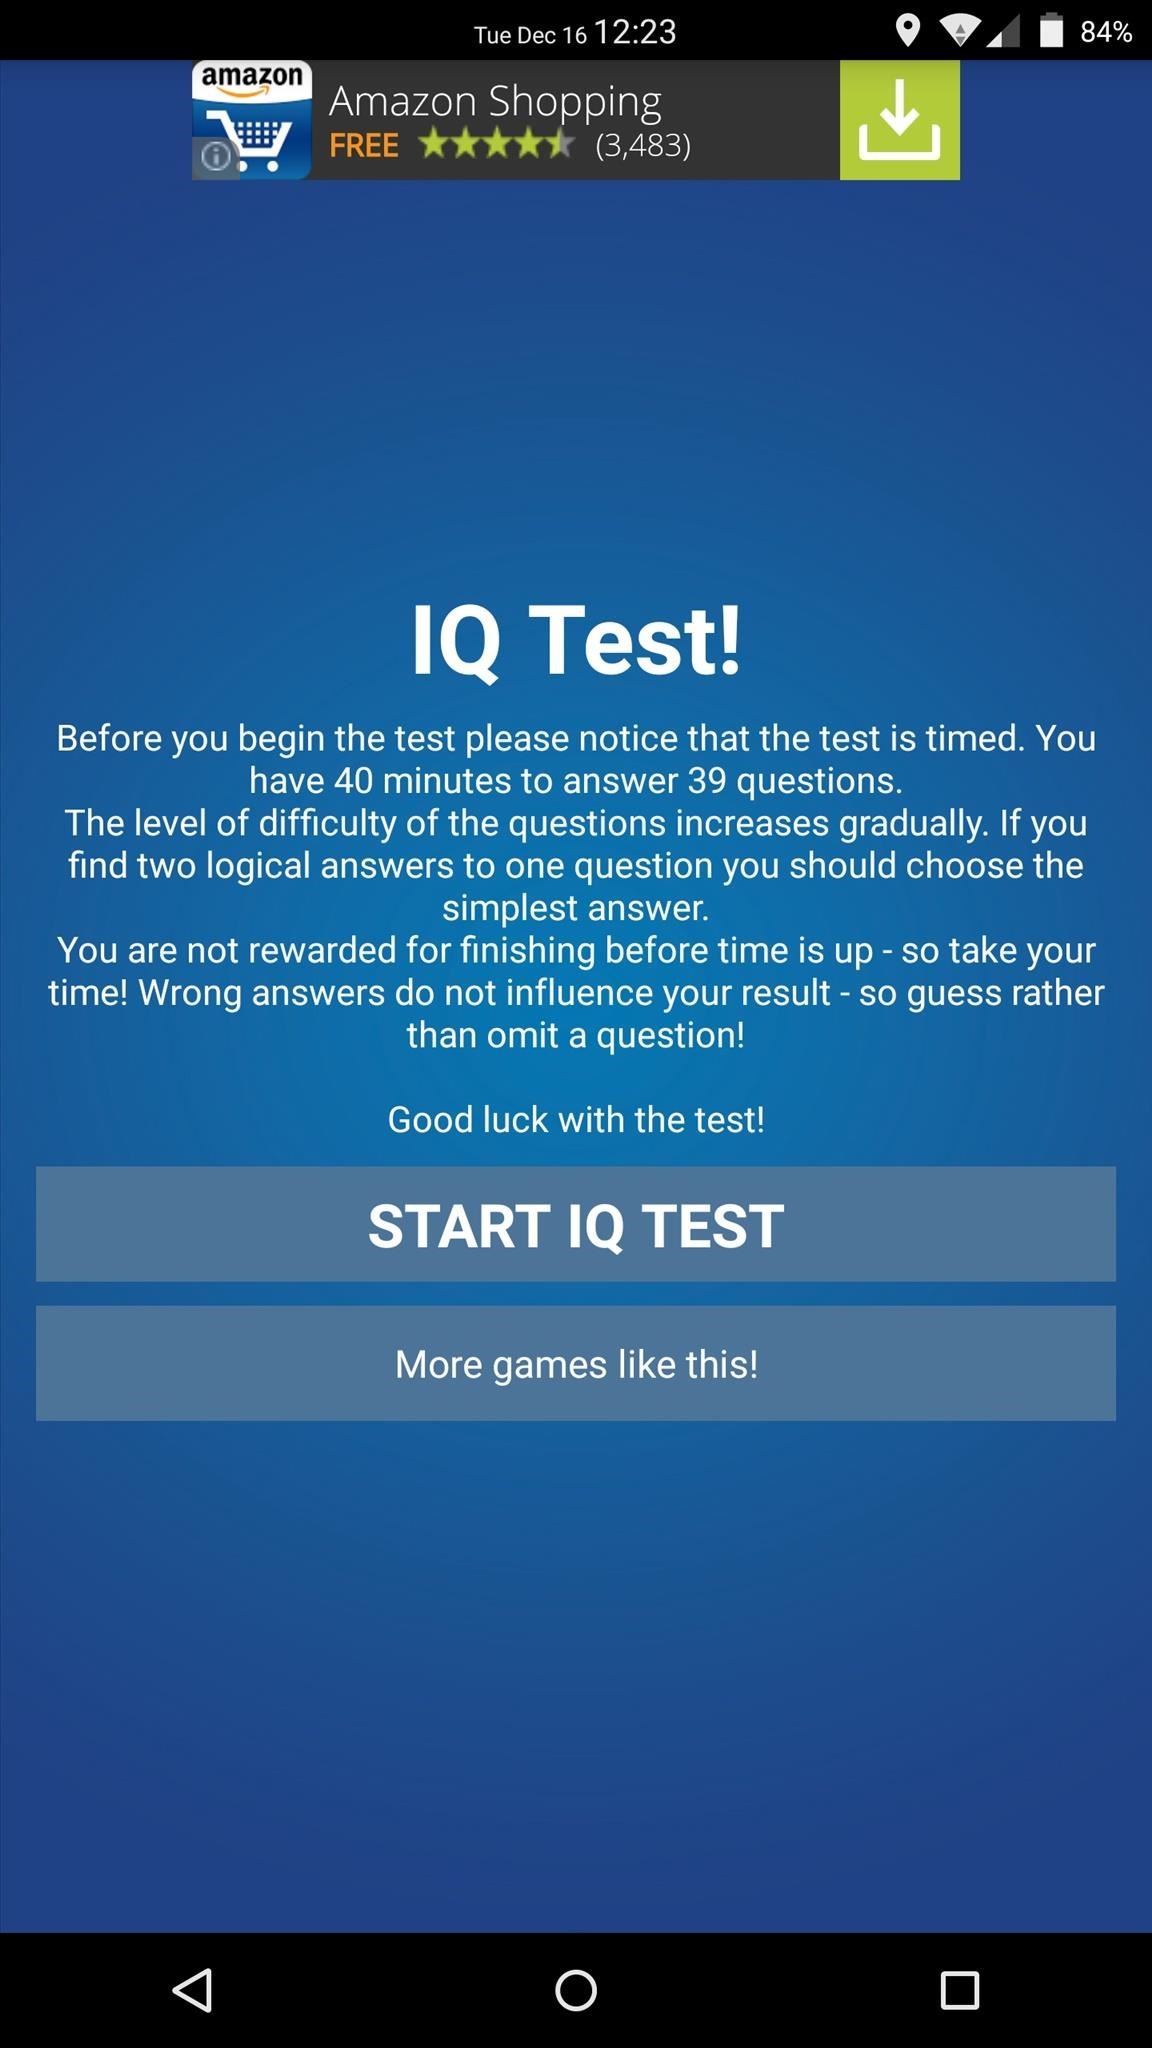 Feeling Smart? Test Your IQ with Your Android Device